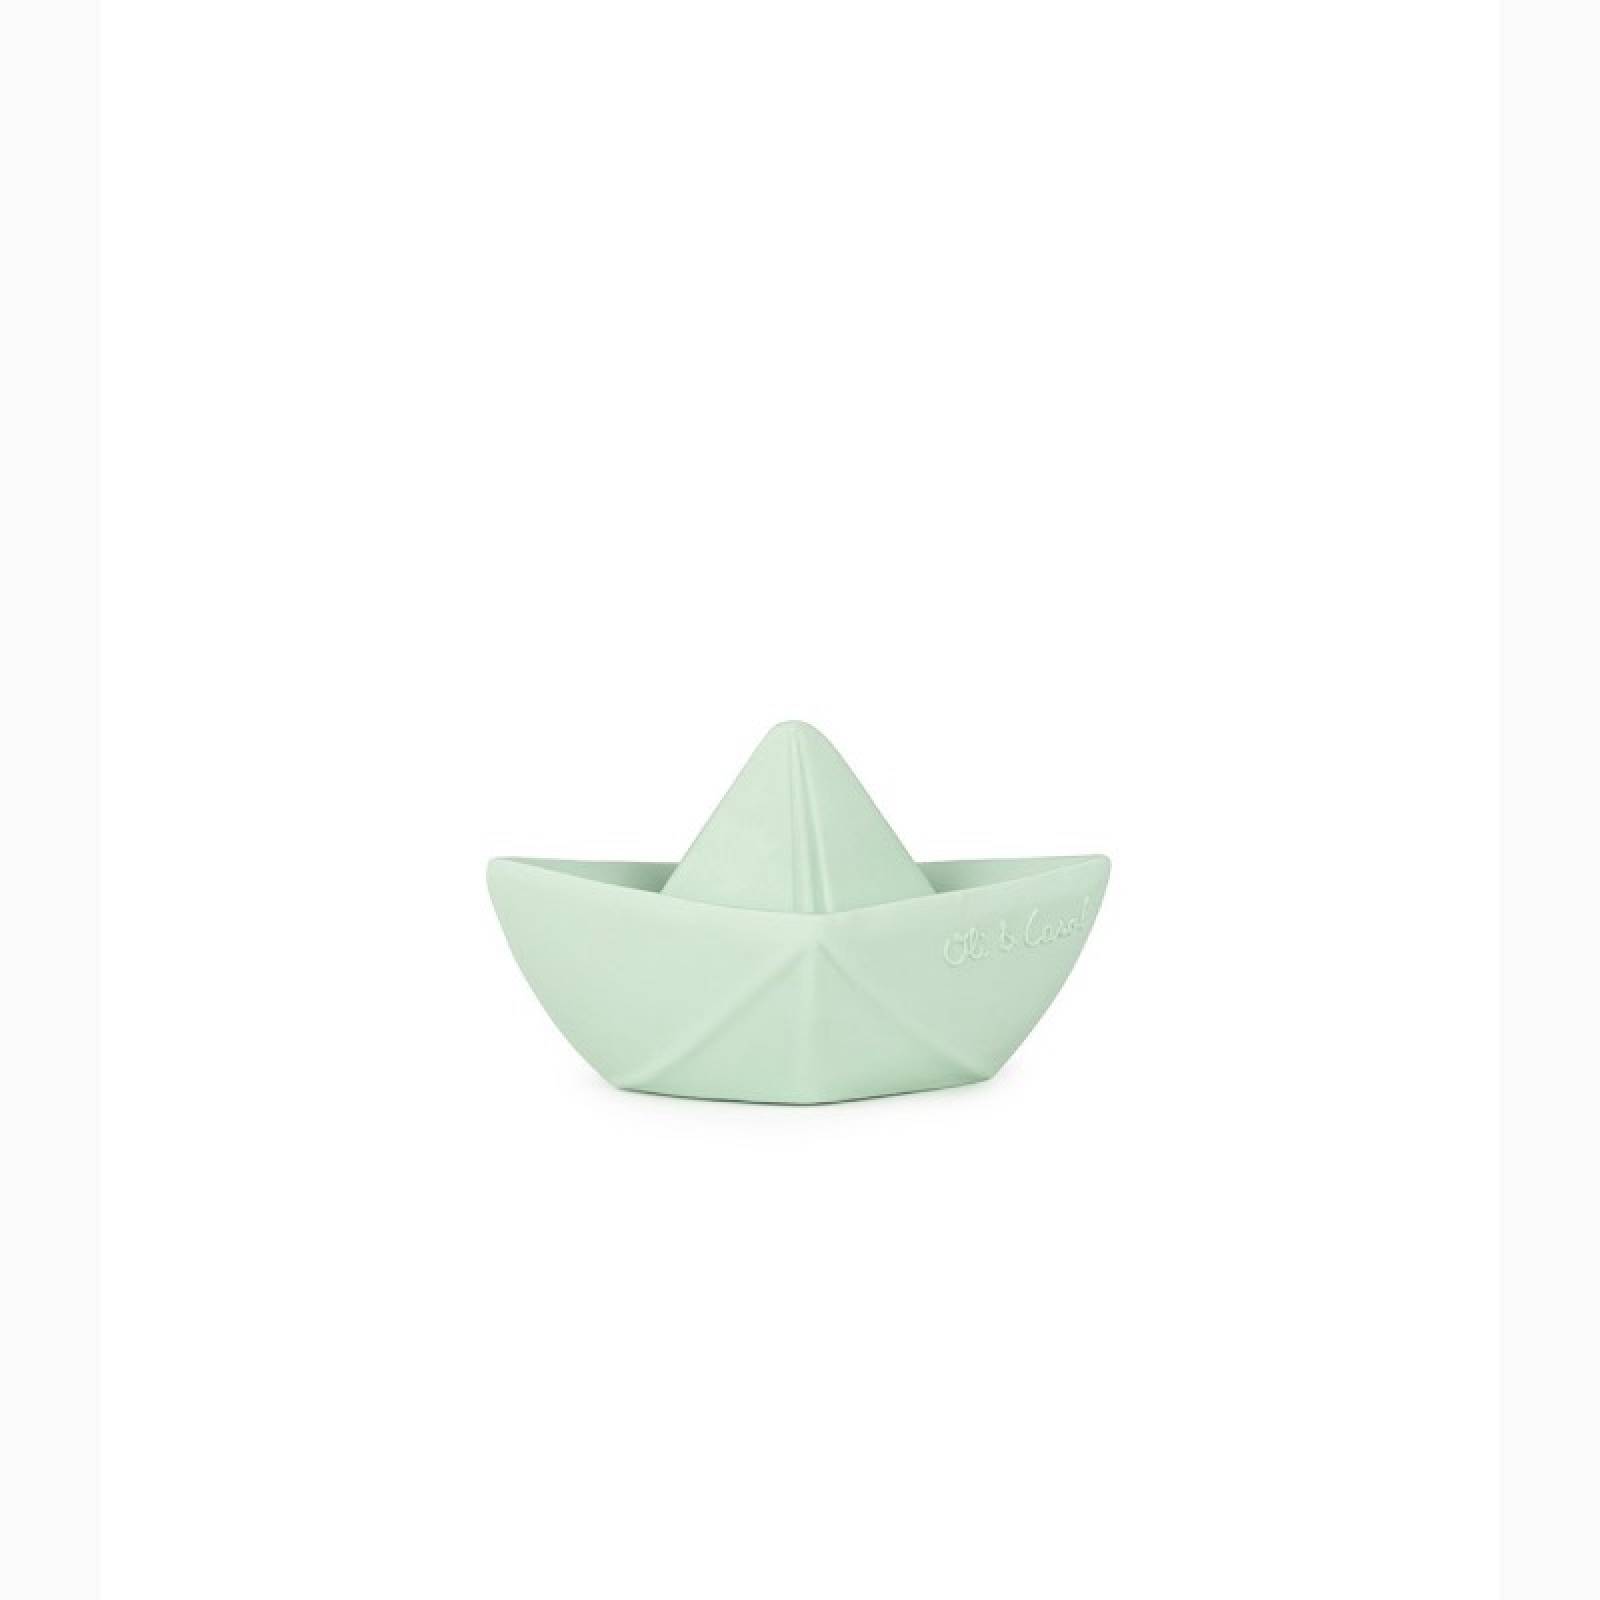 Origami Boat Natural Rubber Bath Toy In Mint 0+ thumbnails